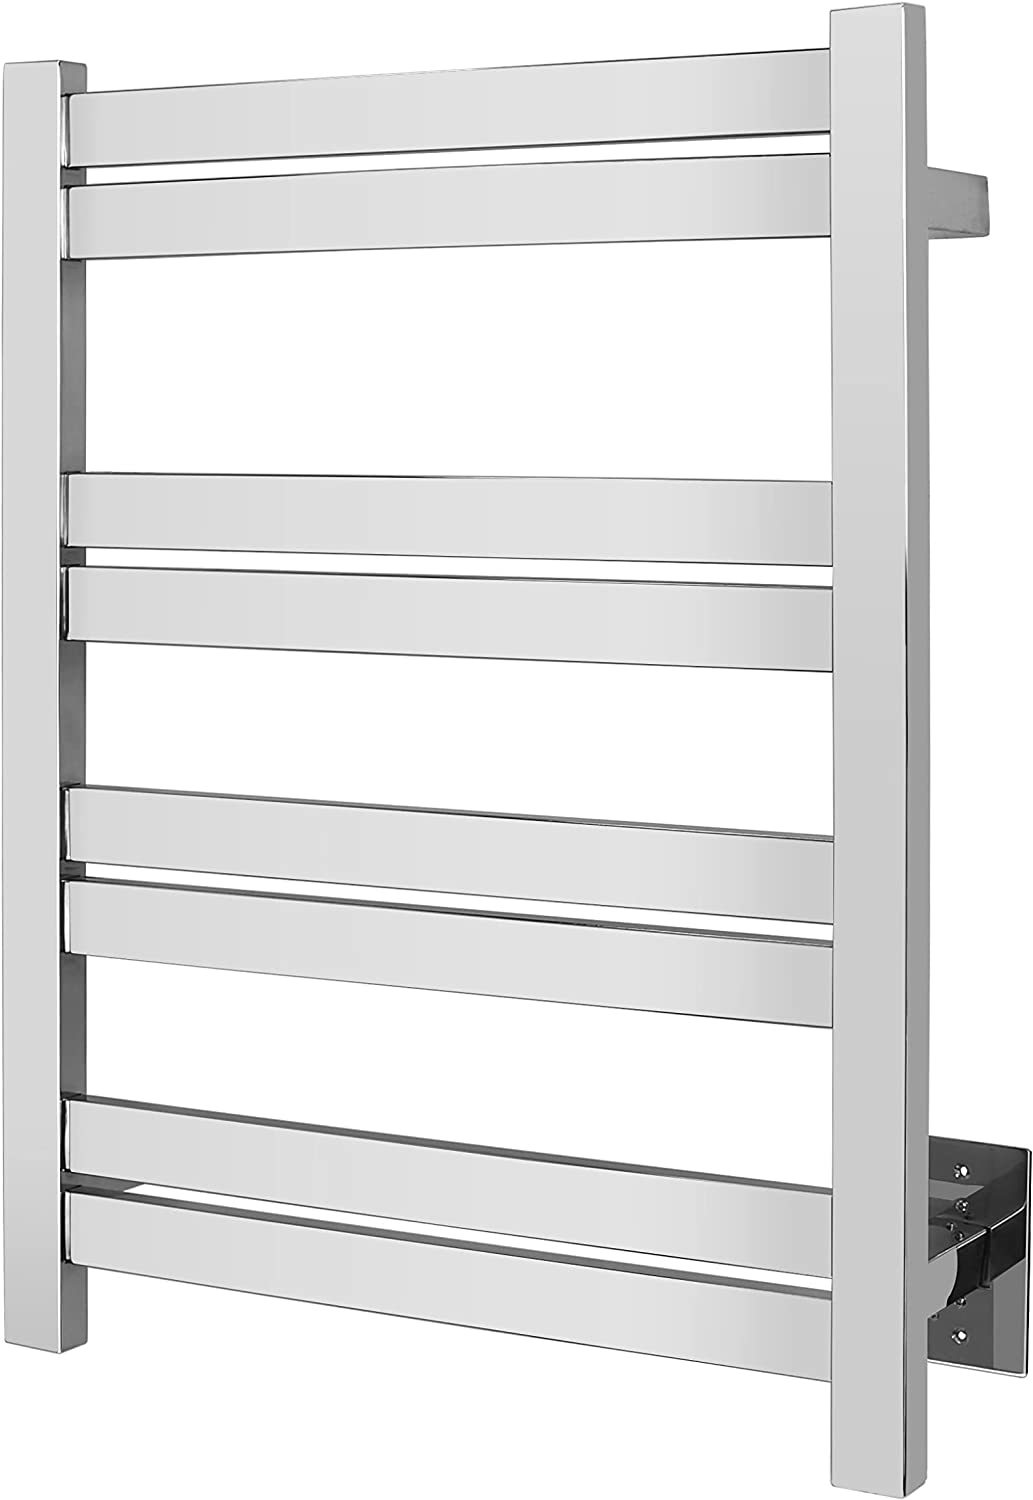 Primary image for Warmlyyours Tws6-Mpl08Ph 8-Bar Maple Electric Heated Bath Towel Warmer, Polished